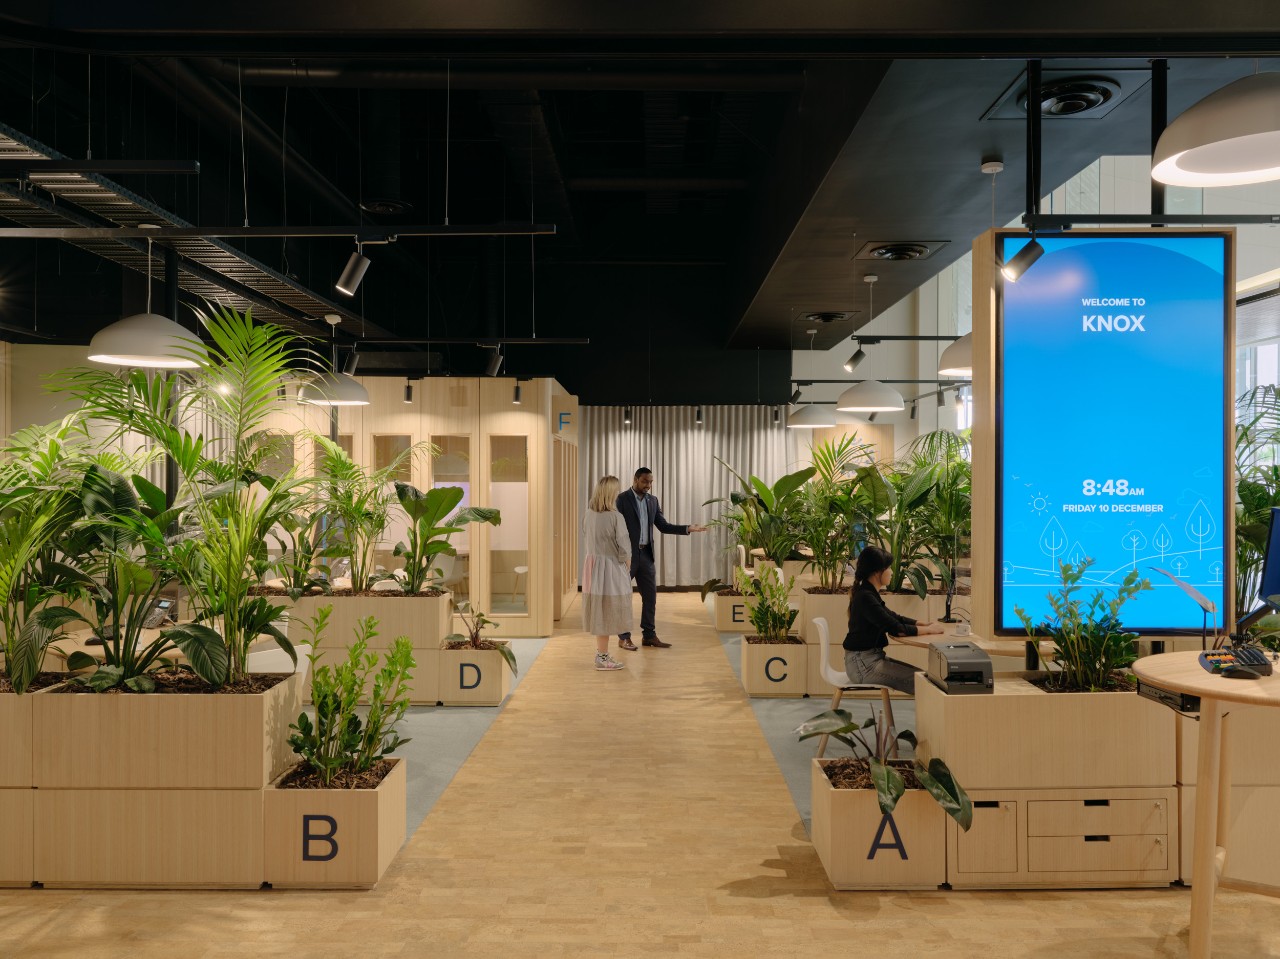 An ANZ branch featuring pale wood, plants, a large display screen and two people standing talking